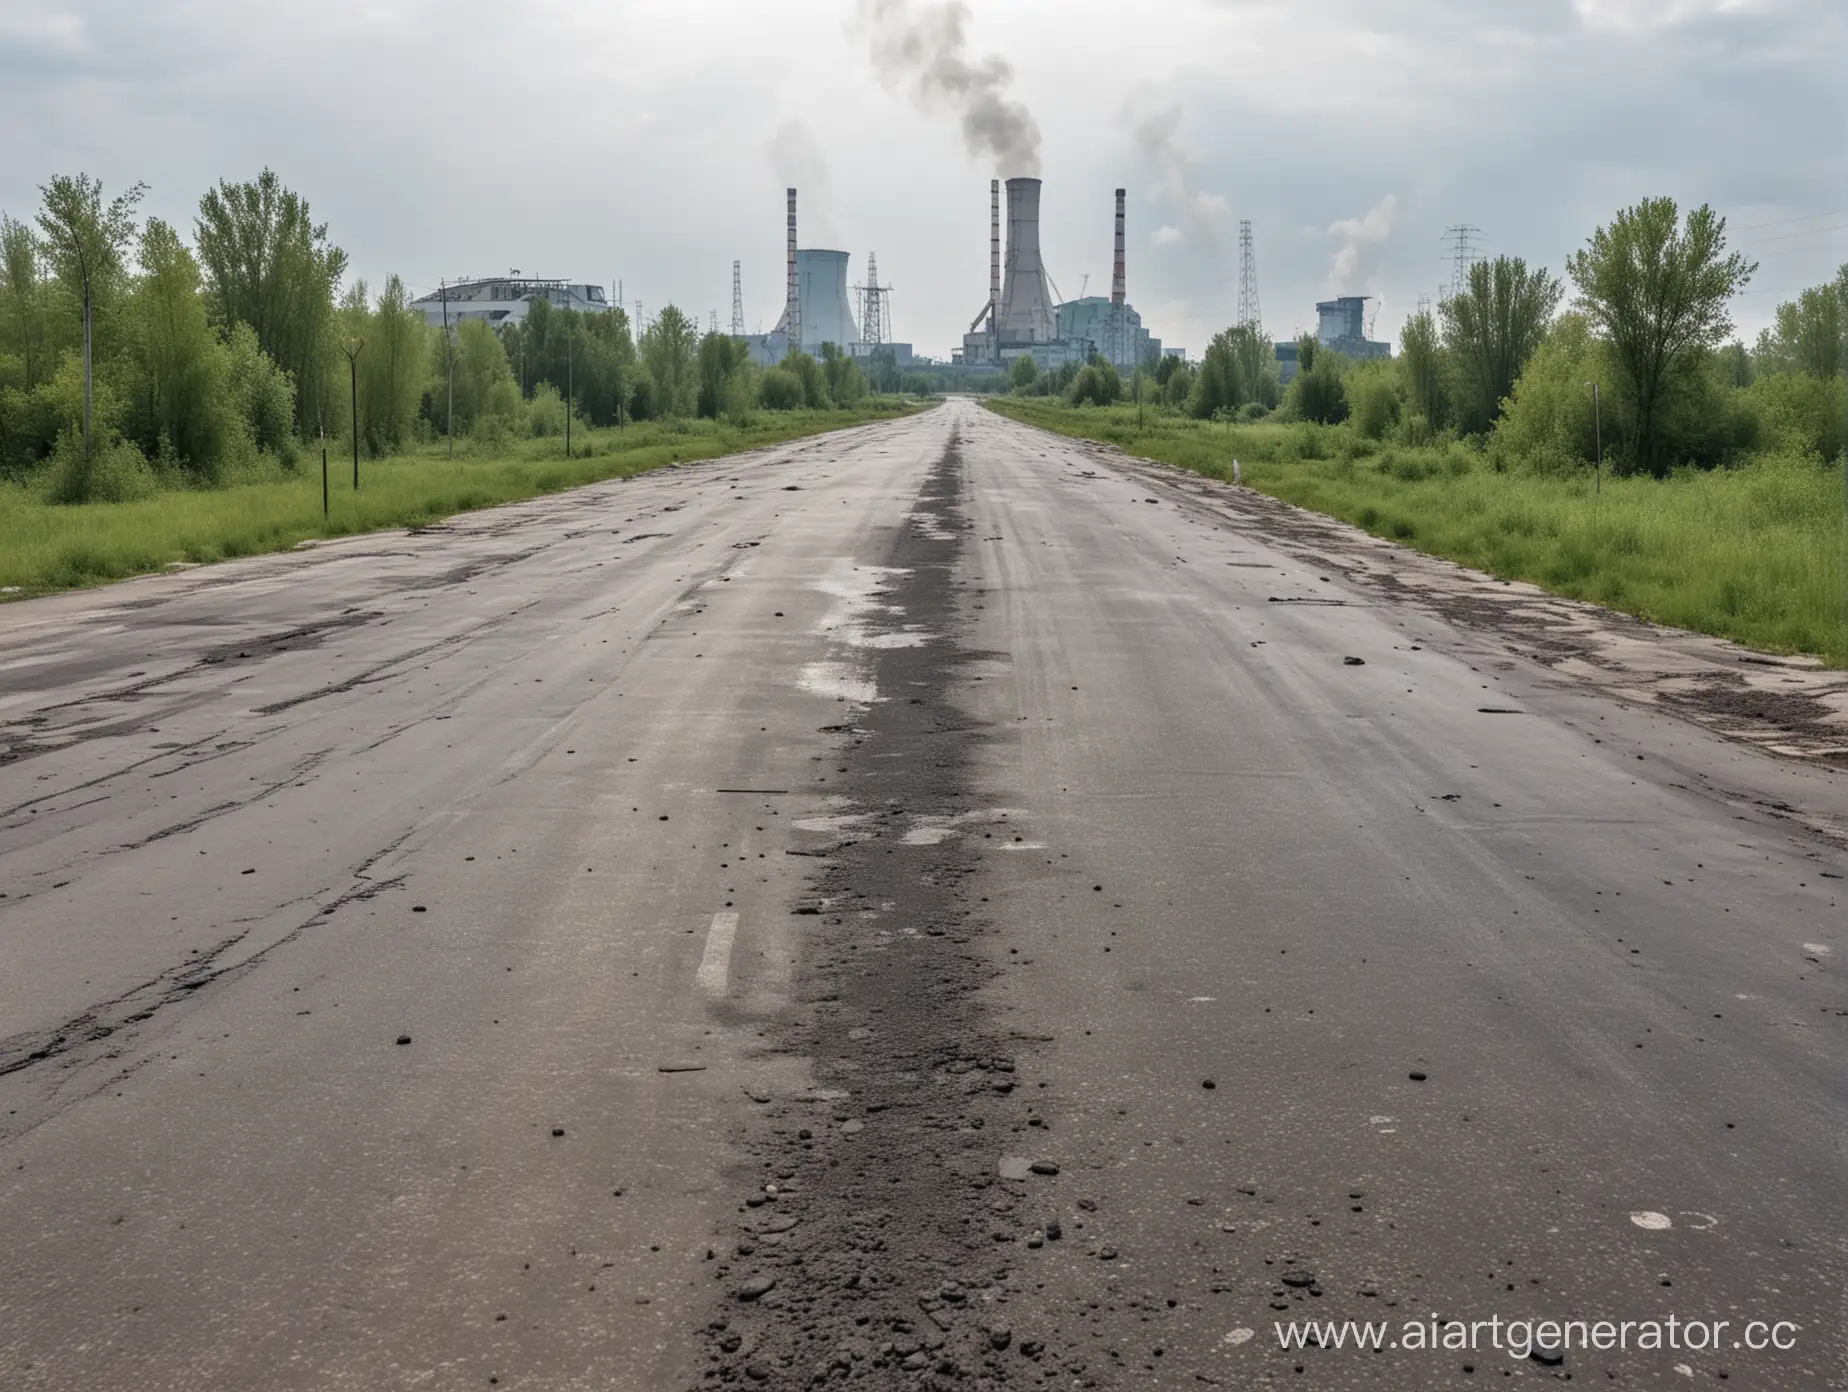 Desolate-Chernobyl-Landscape-with-Abandoned-Buildings-and-Green-Smoke